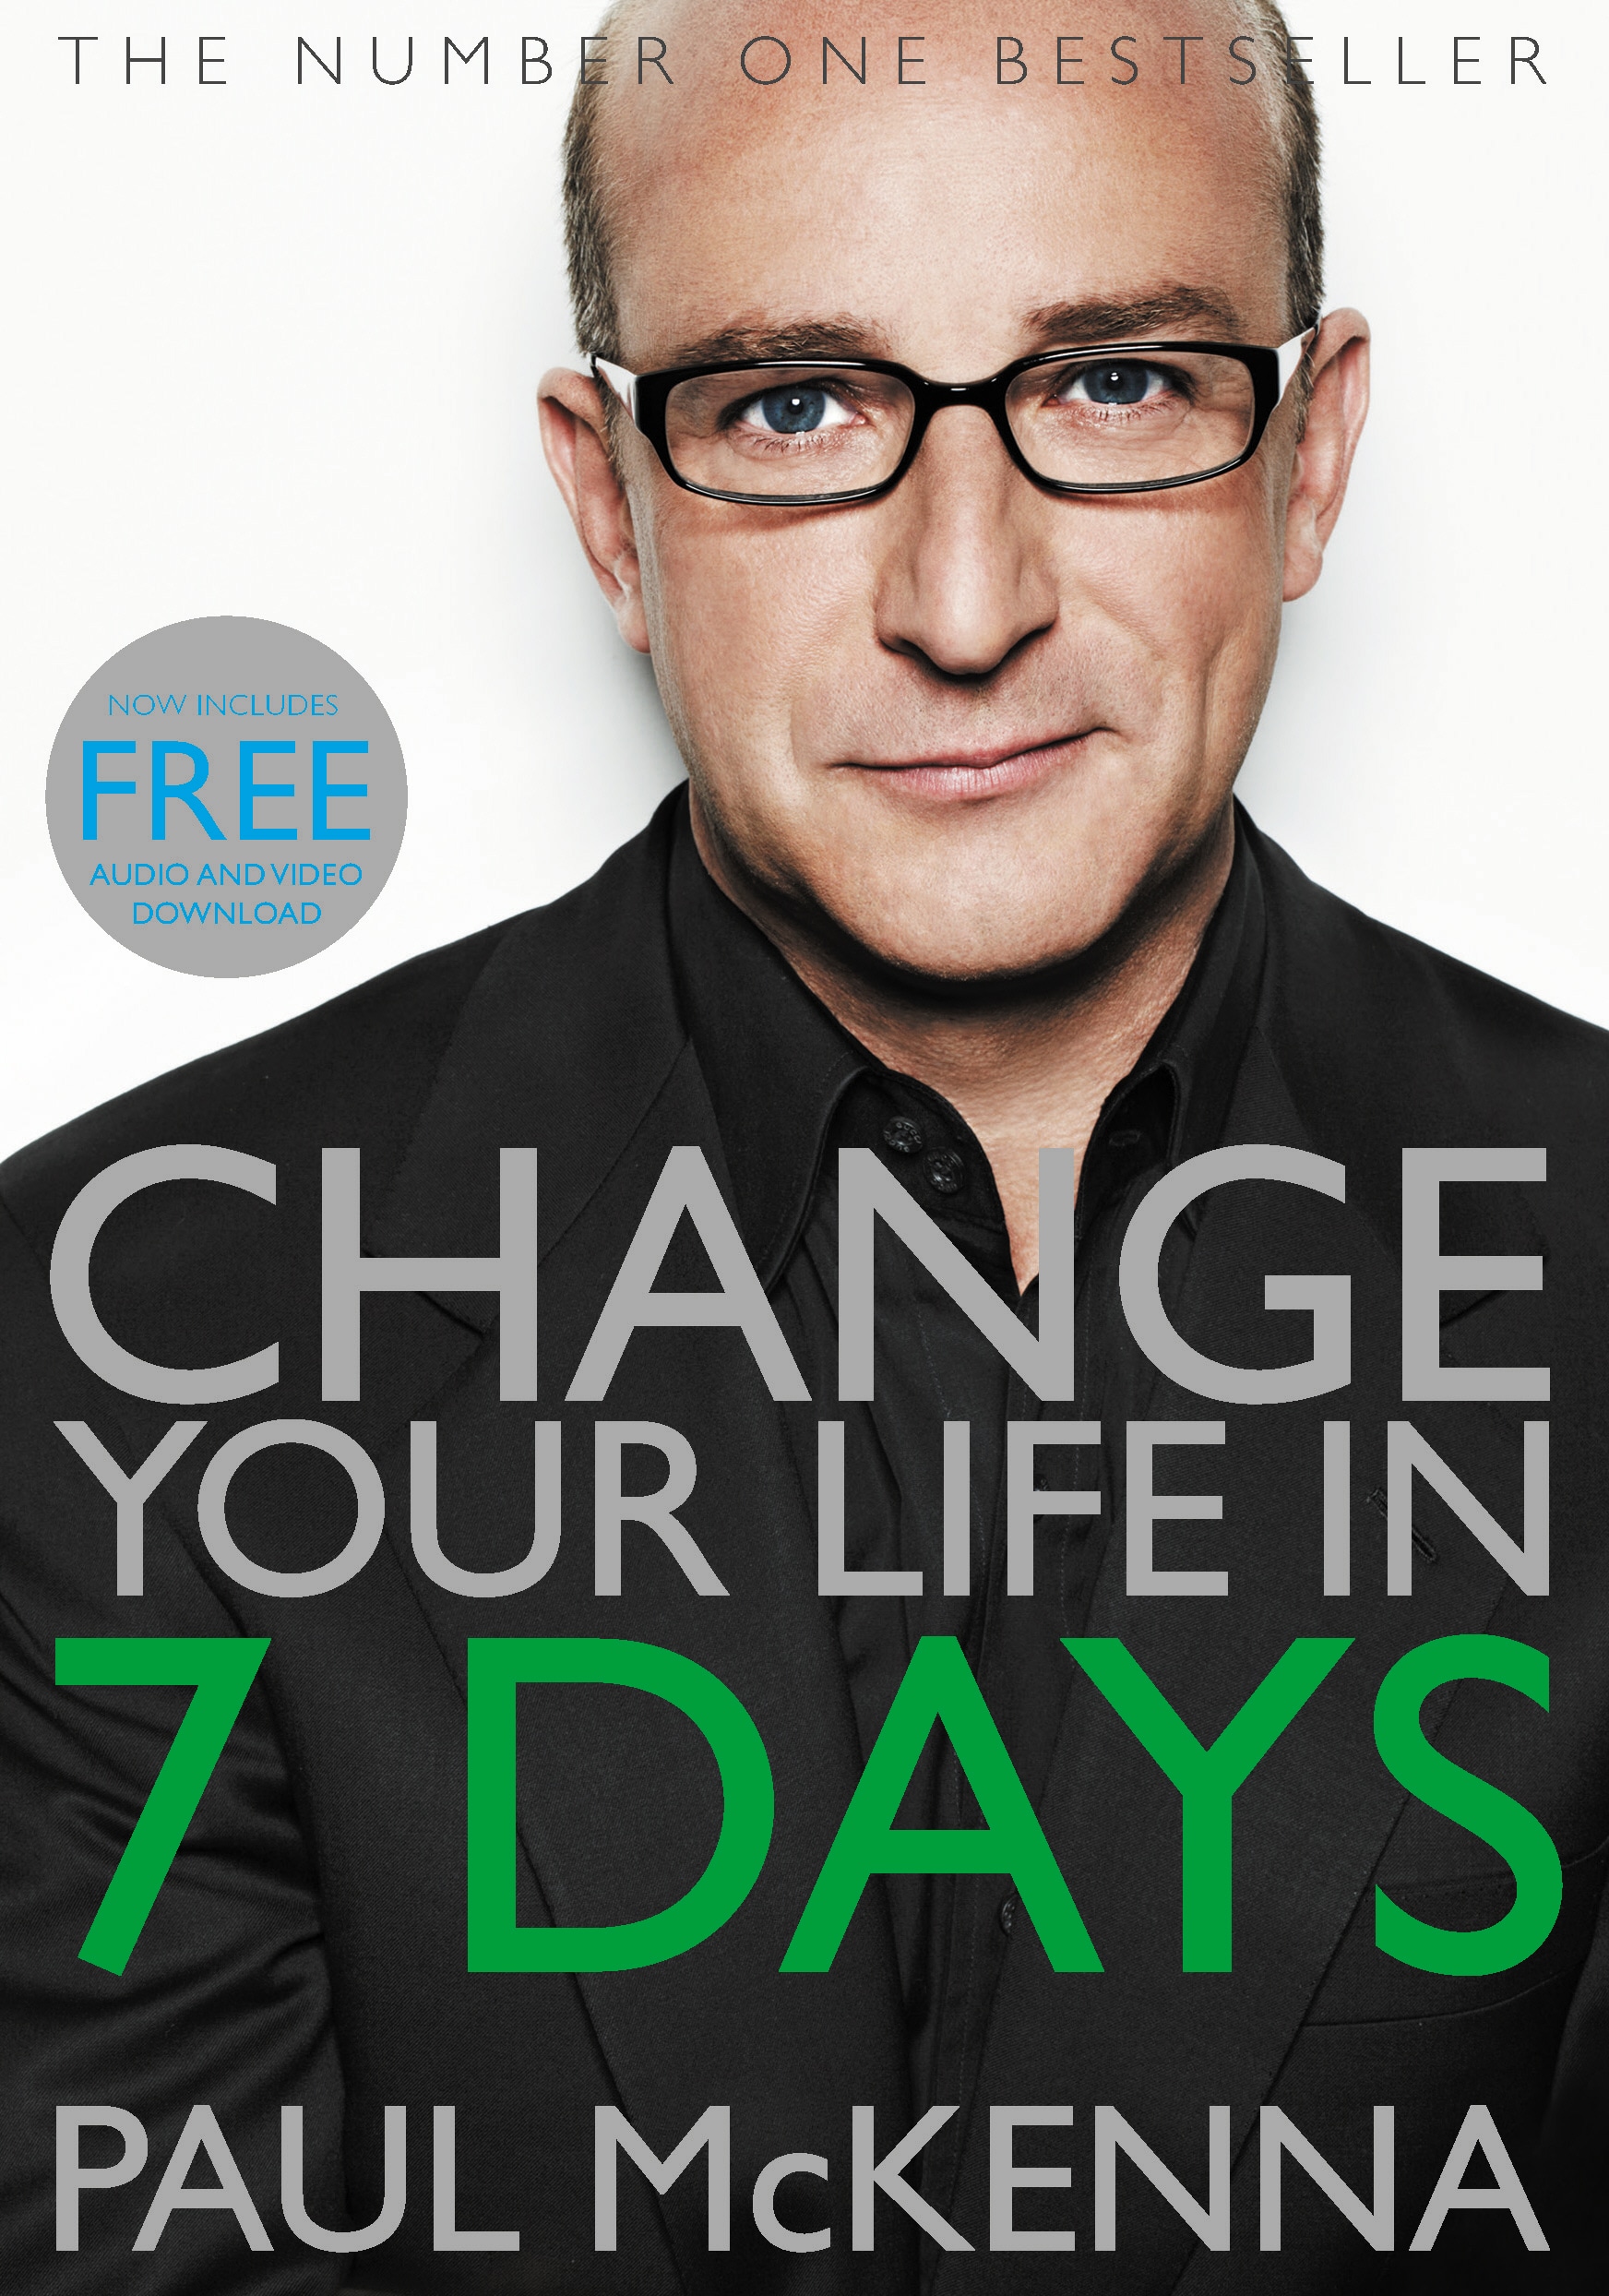 Book “Change Your Life In Seven Days” by Paul McKenna — May 30, 2019